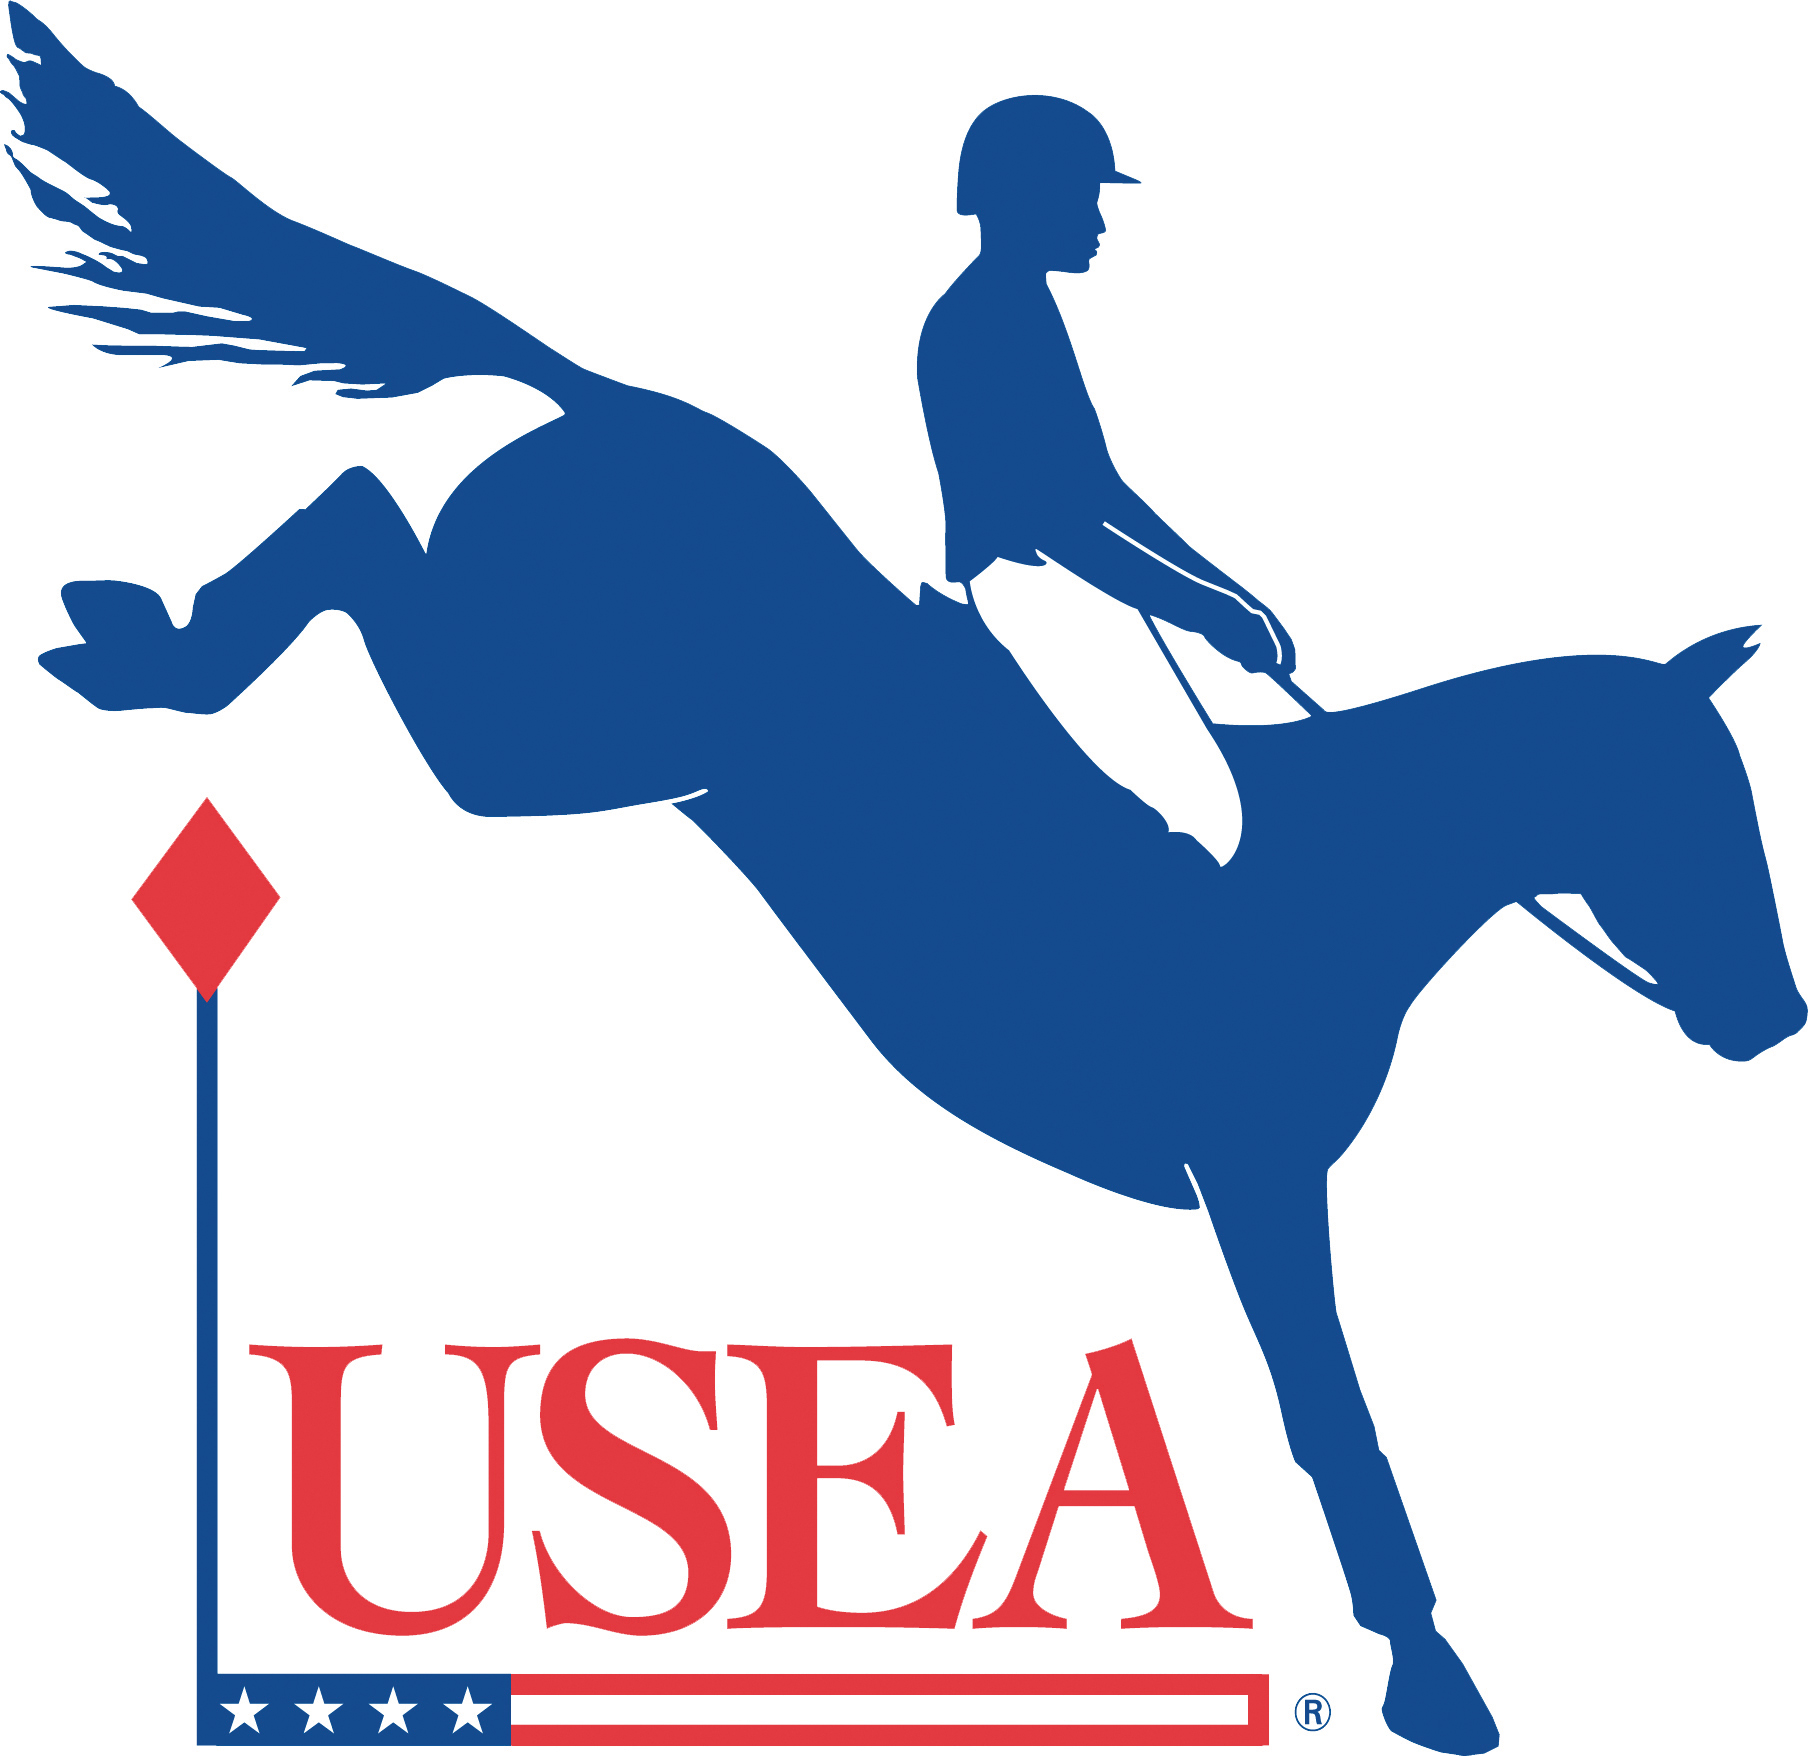 The New Olympic Format for Eventing and the Future of the Sport